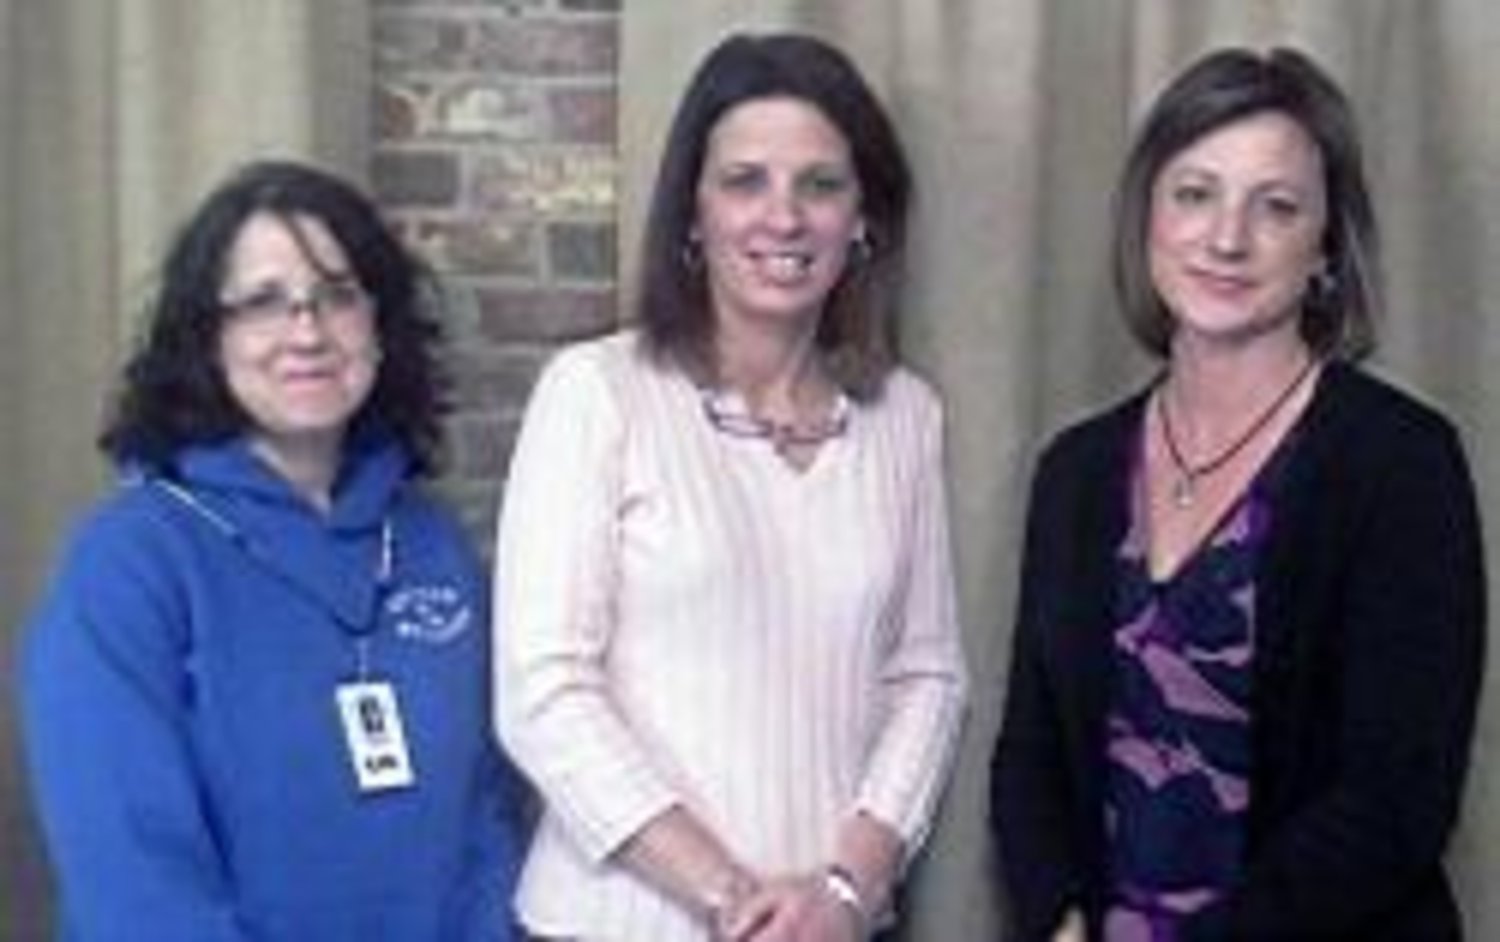 From left to right: Shelley Chance, Sherrie Callahan and Penny Peek are the recipients of two $5000 grants given to teaching departments within Quitman High School.